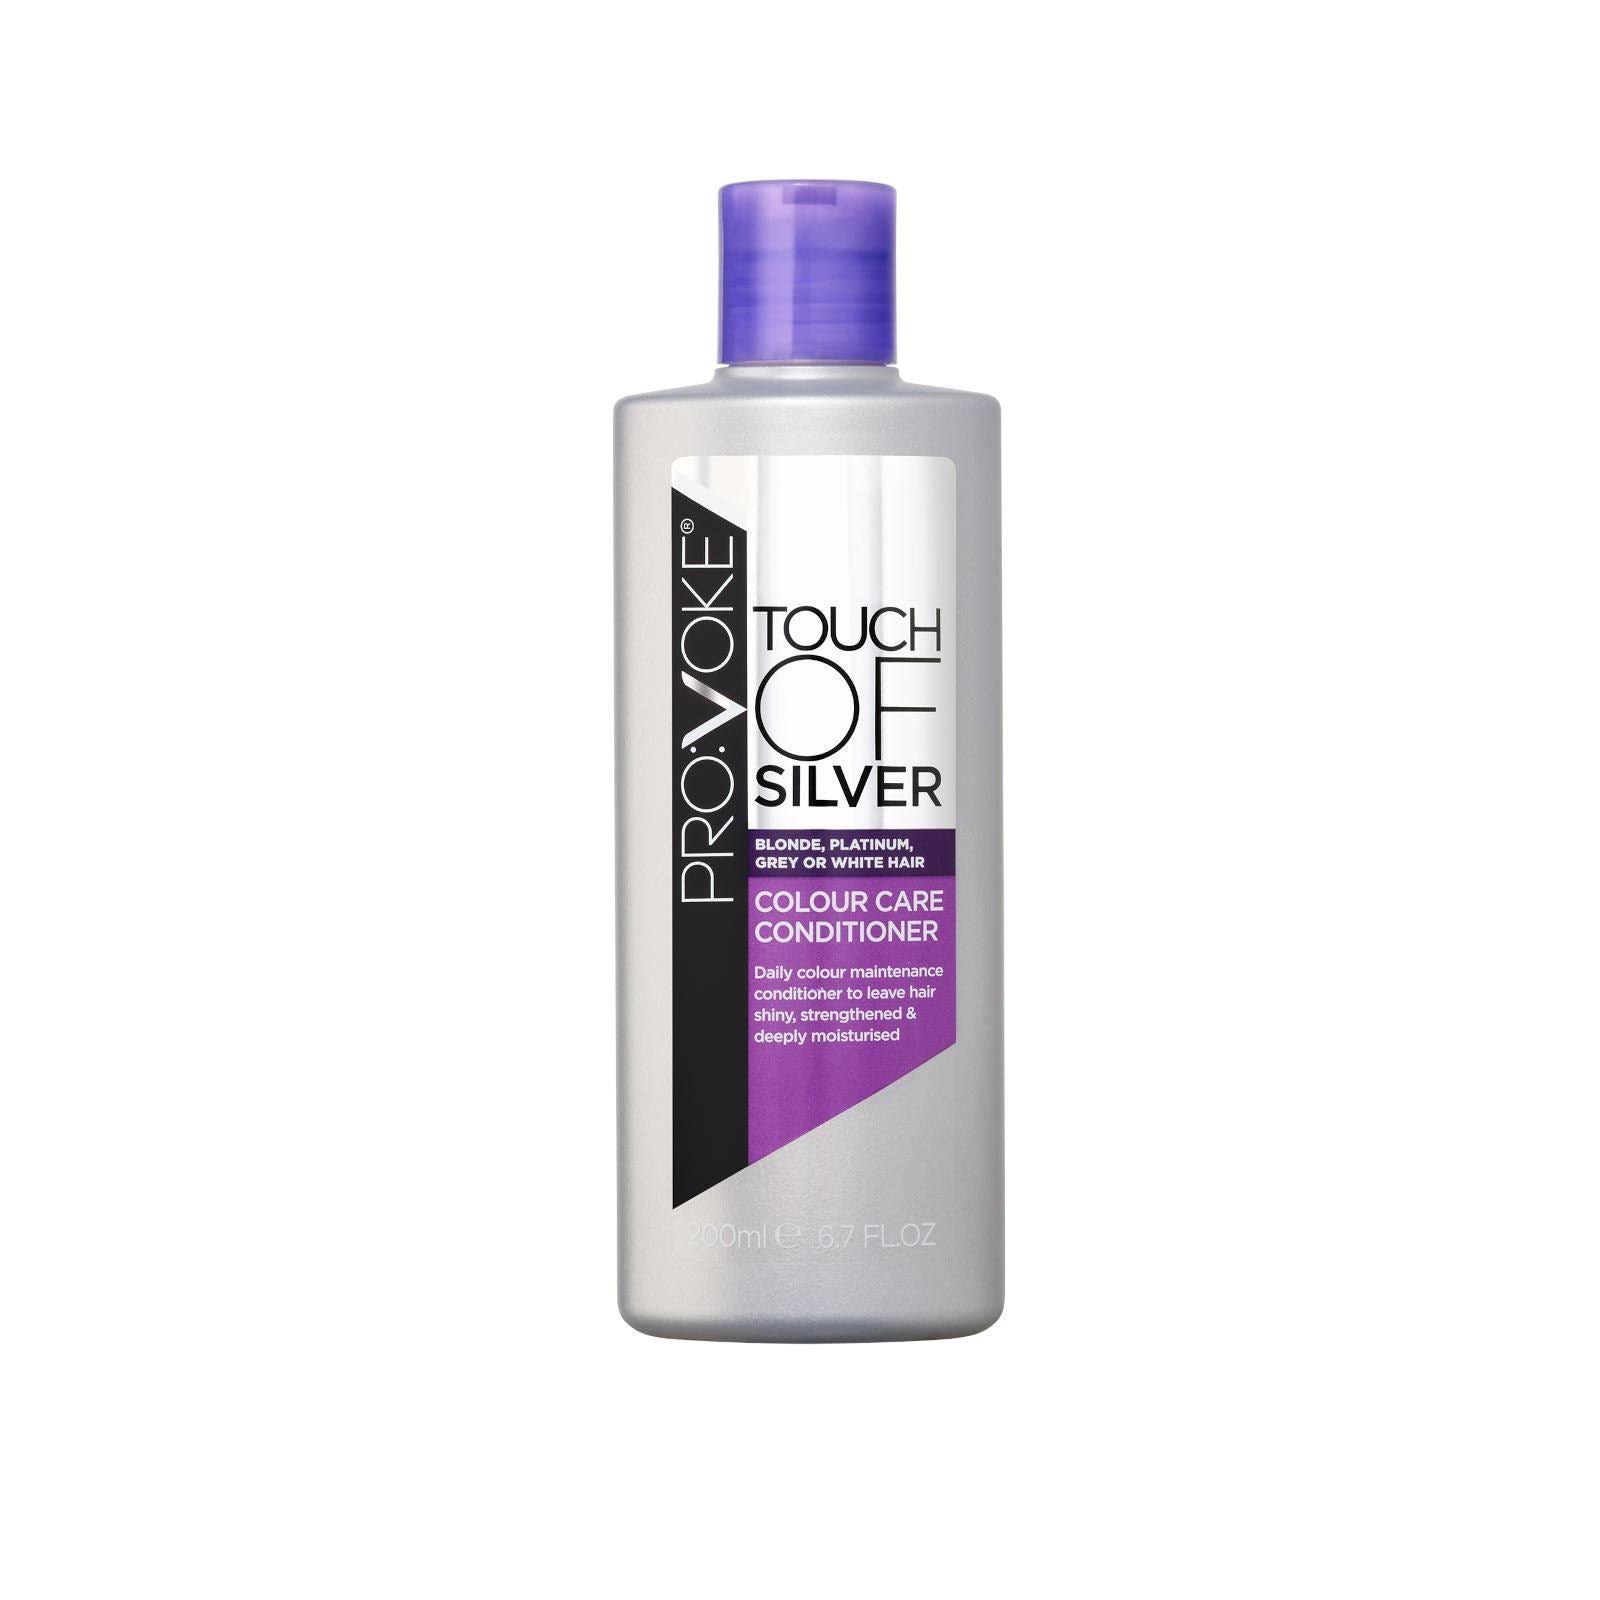 Touch of Silver Colour Care Conditioner 200ml